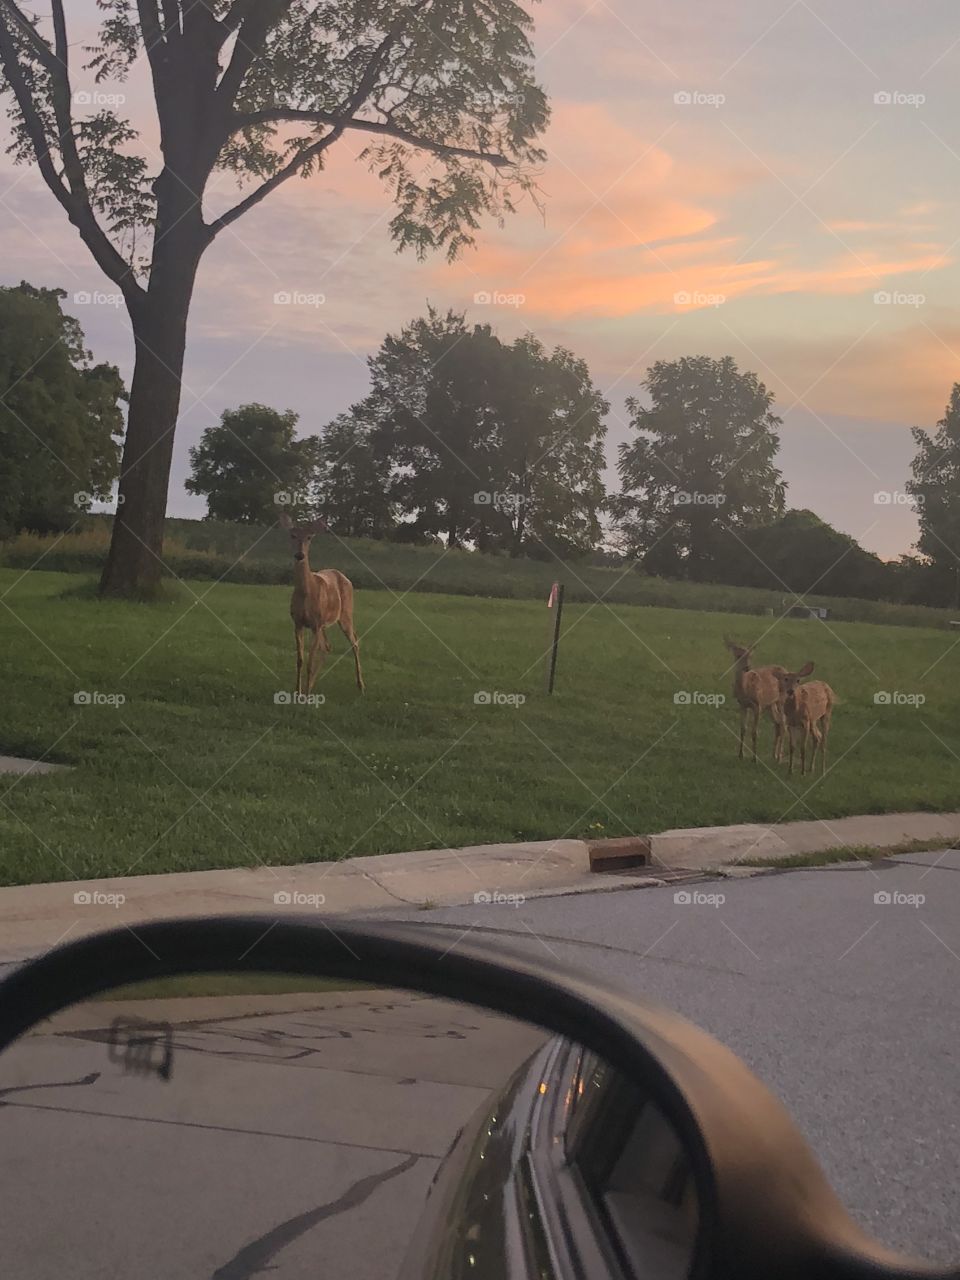 Family of Deer under a Gorgeous Sunset